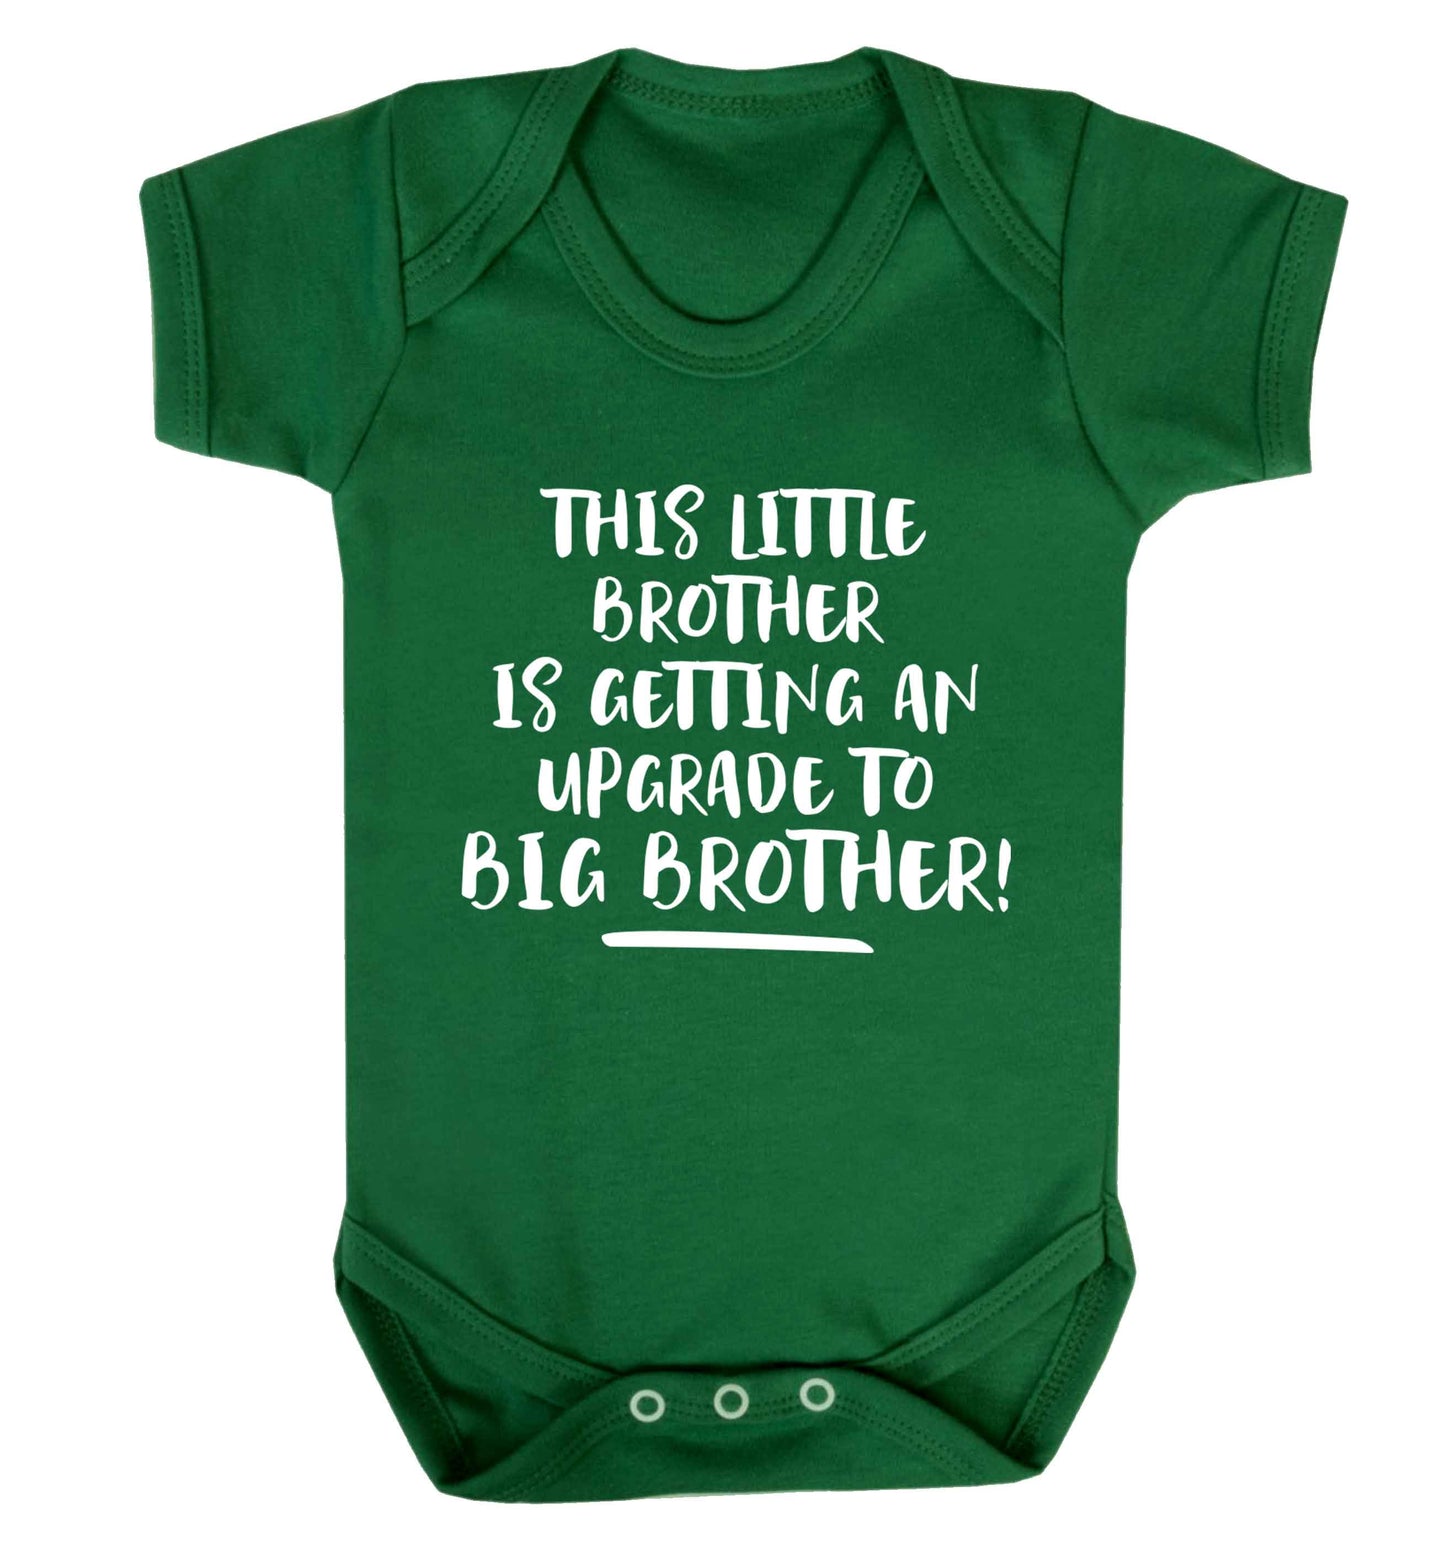 This little brother is getting an upgrade to big brother! Baby Vest green 18-24 months